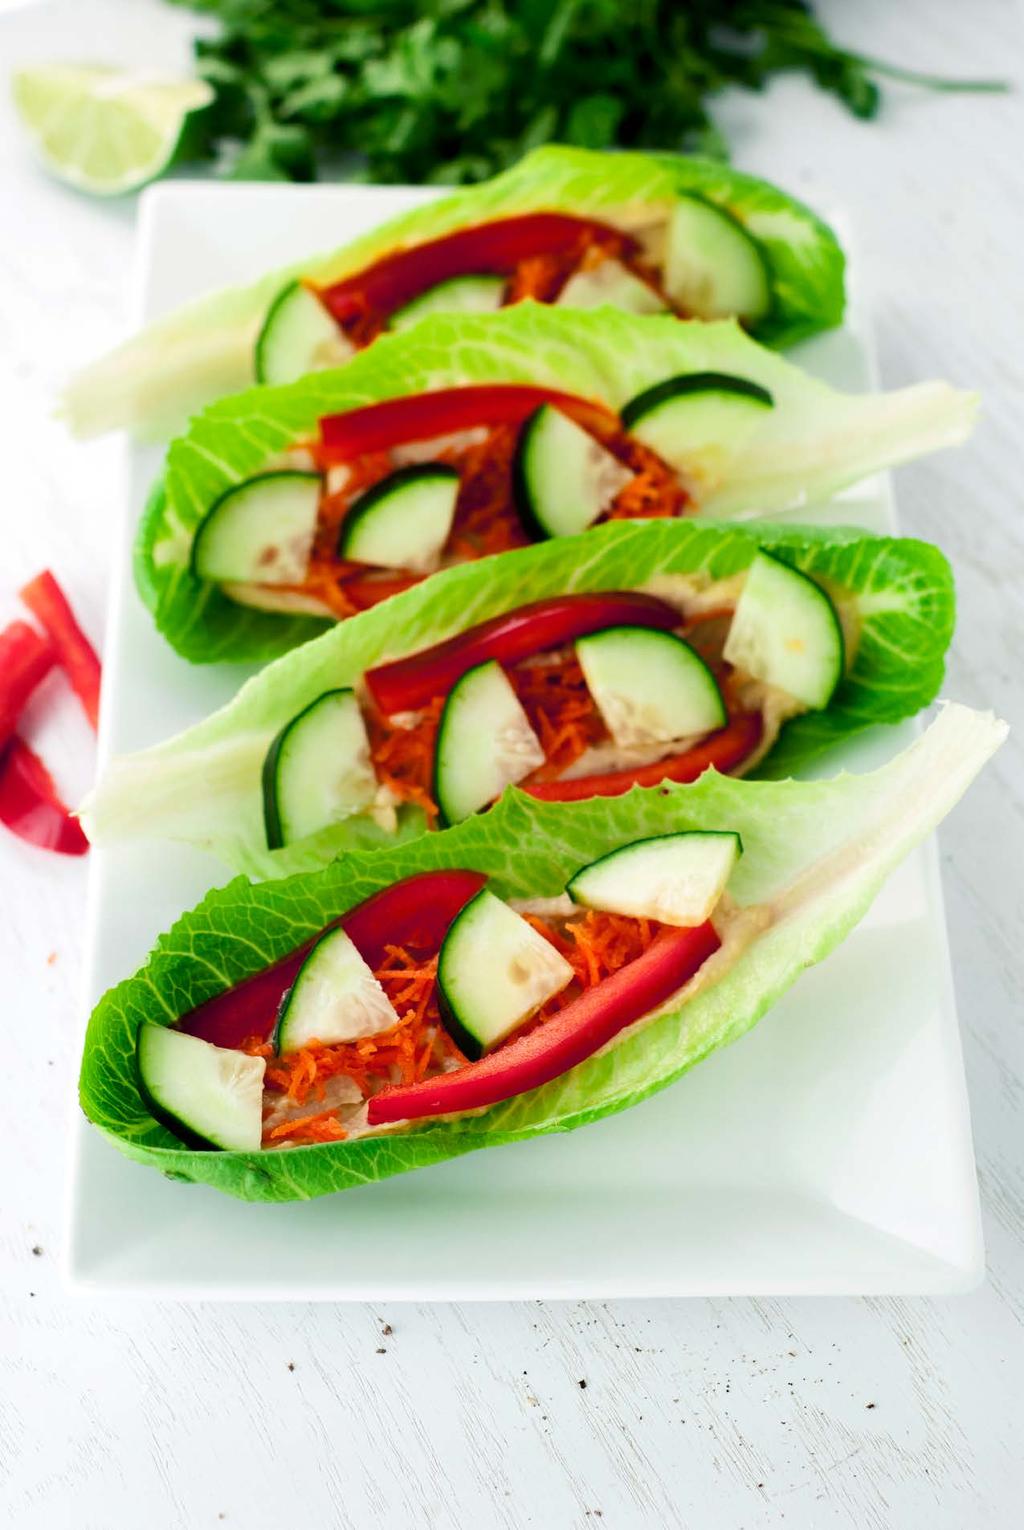 15. Crunch Garden Lettuce Wraps The perfect snack, these lettuce wraps pack a dose of protein in the hummus, paired perfectly with crunchy, crisp cool vegetables!